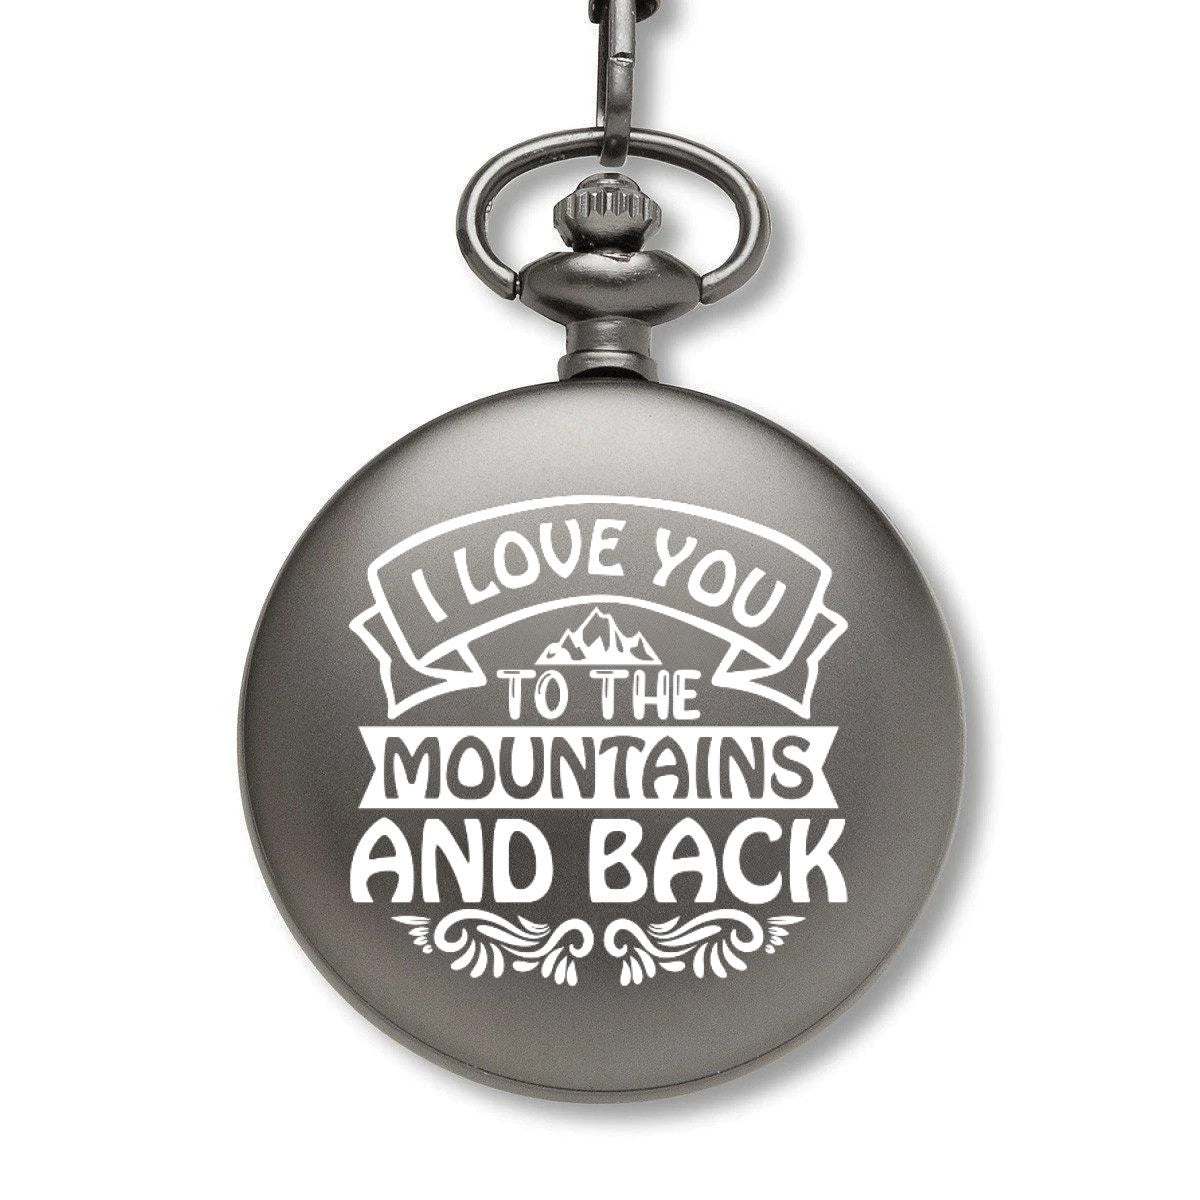 I Love You To The Mountains And Back Pocket Watch